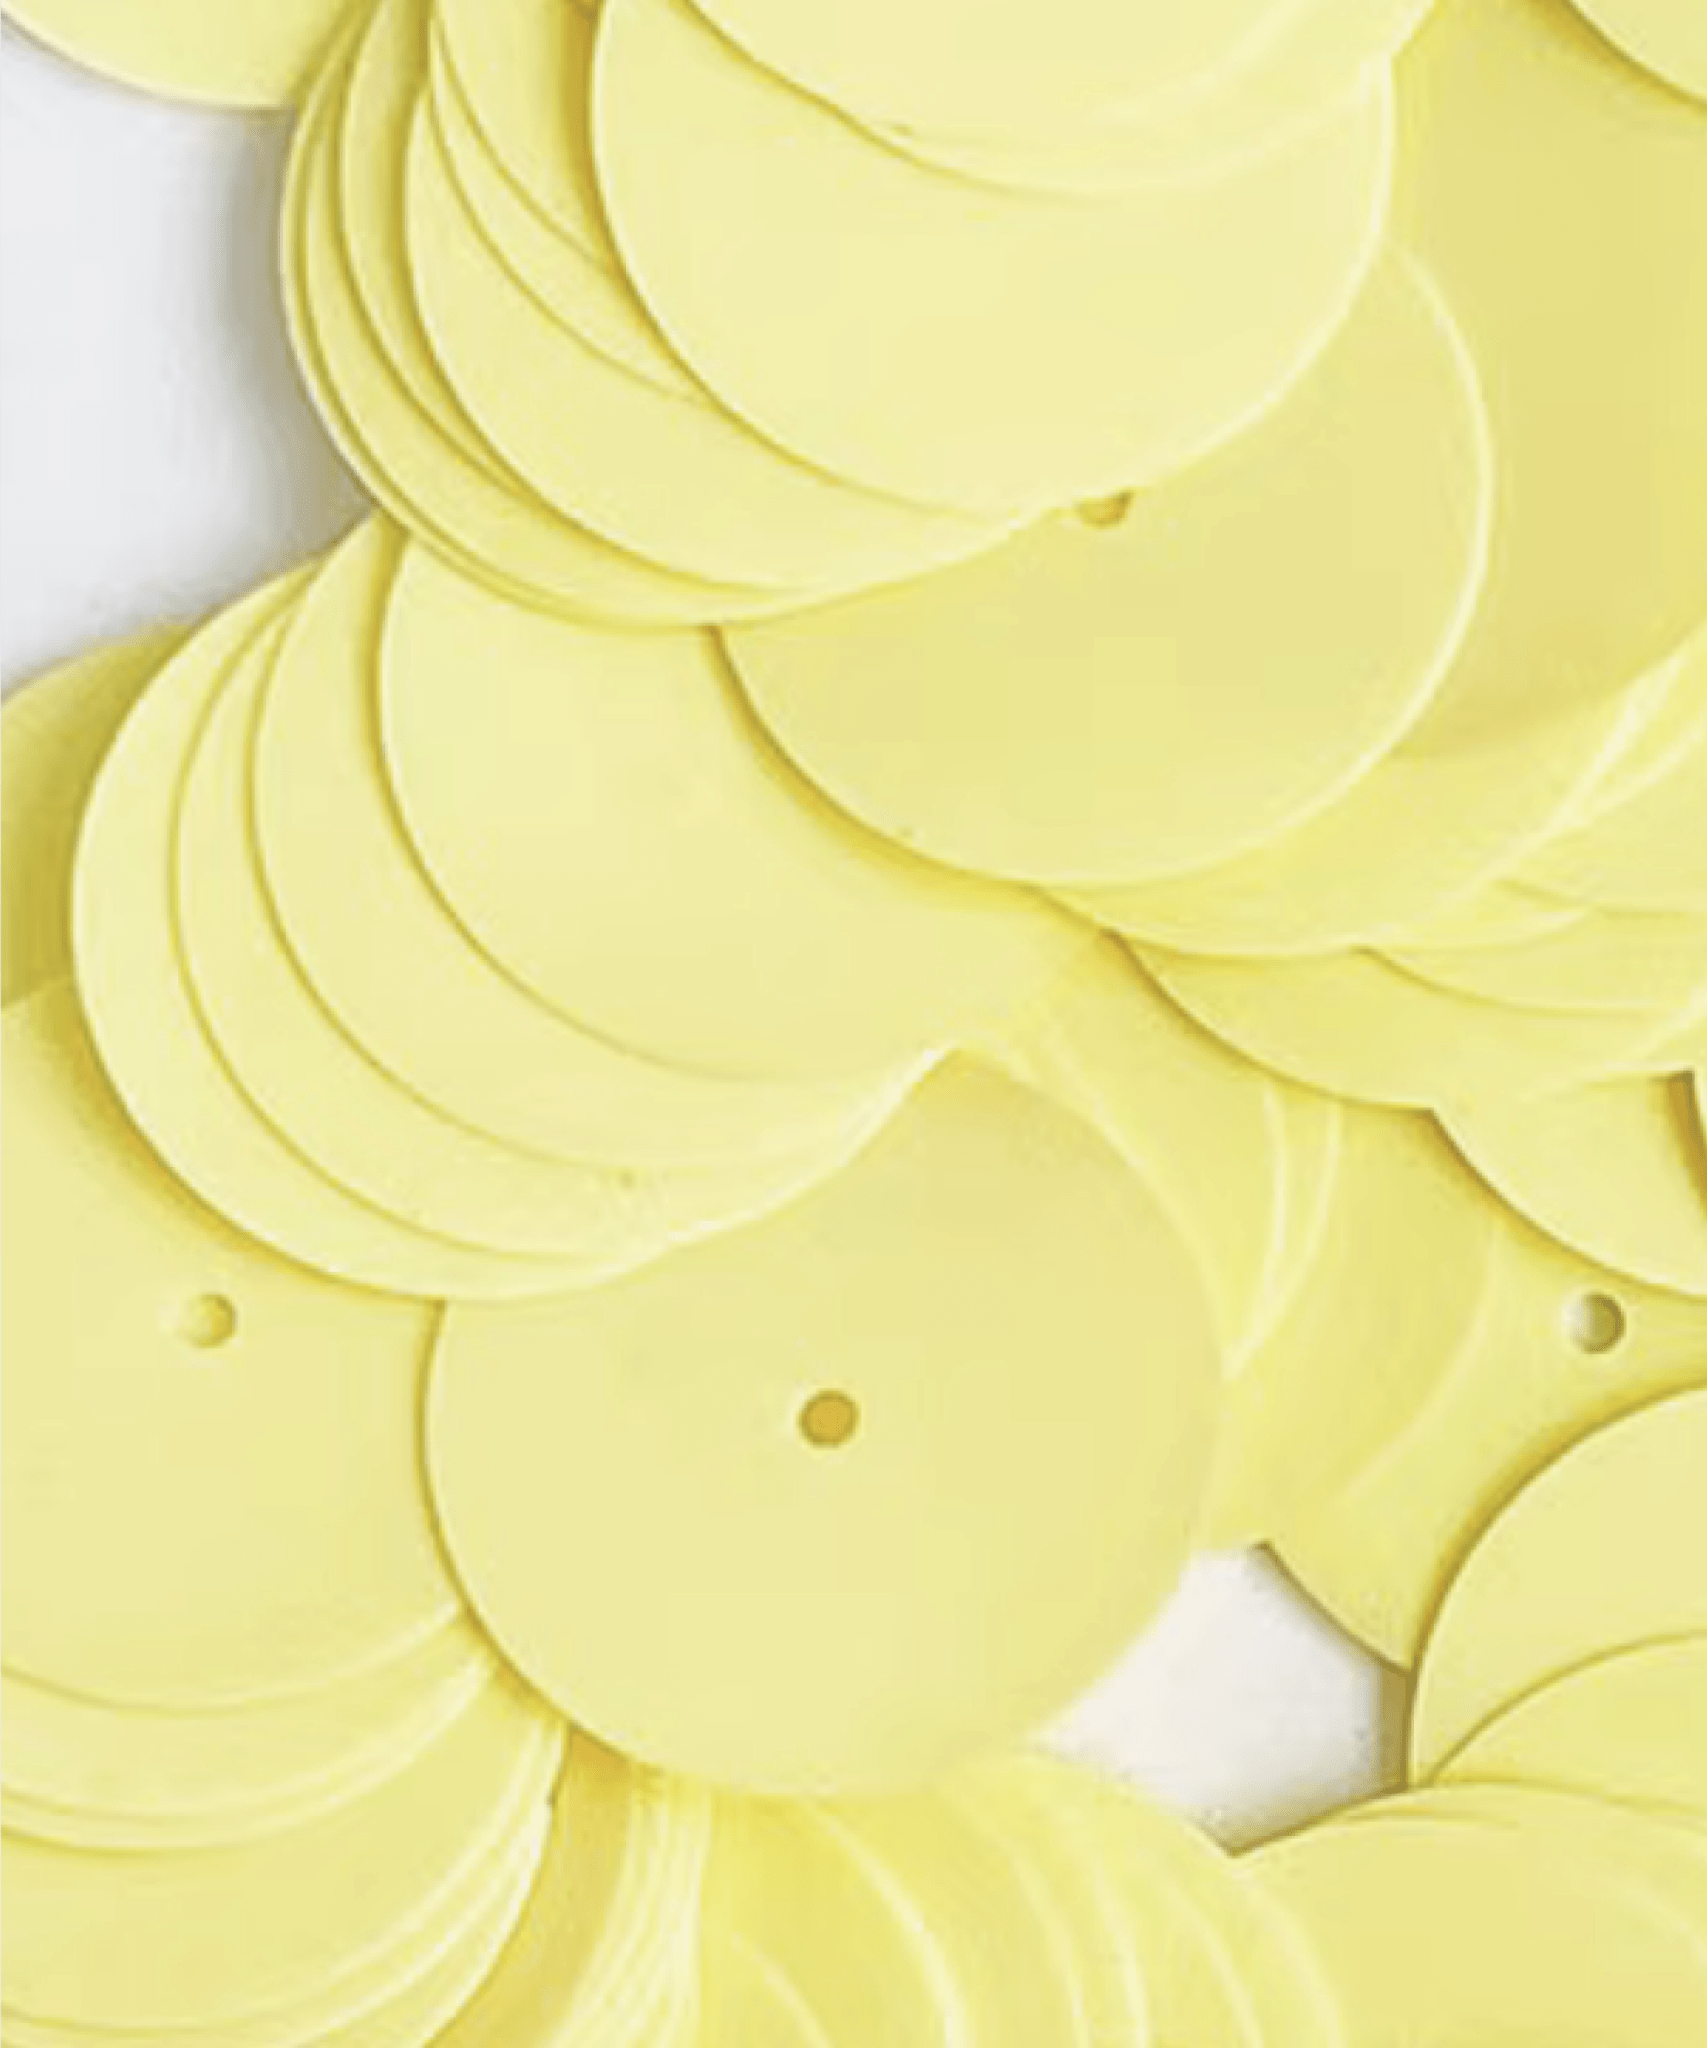 20mm-Porcelain Yellow Hand-embroidered Material Sequins